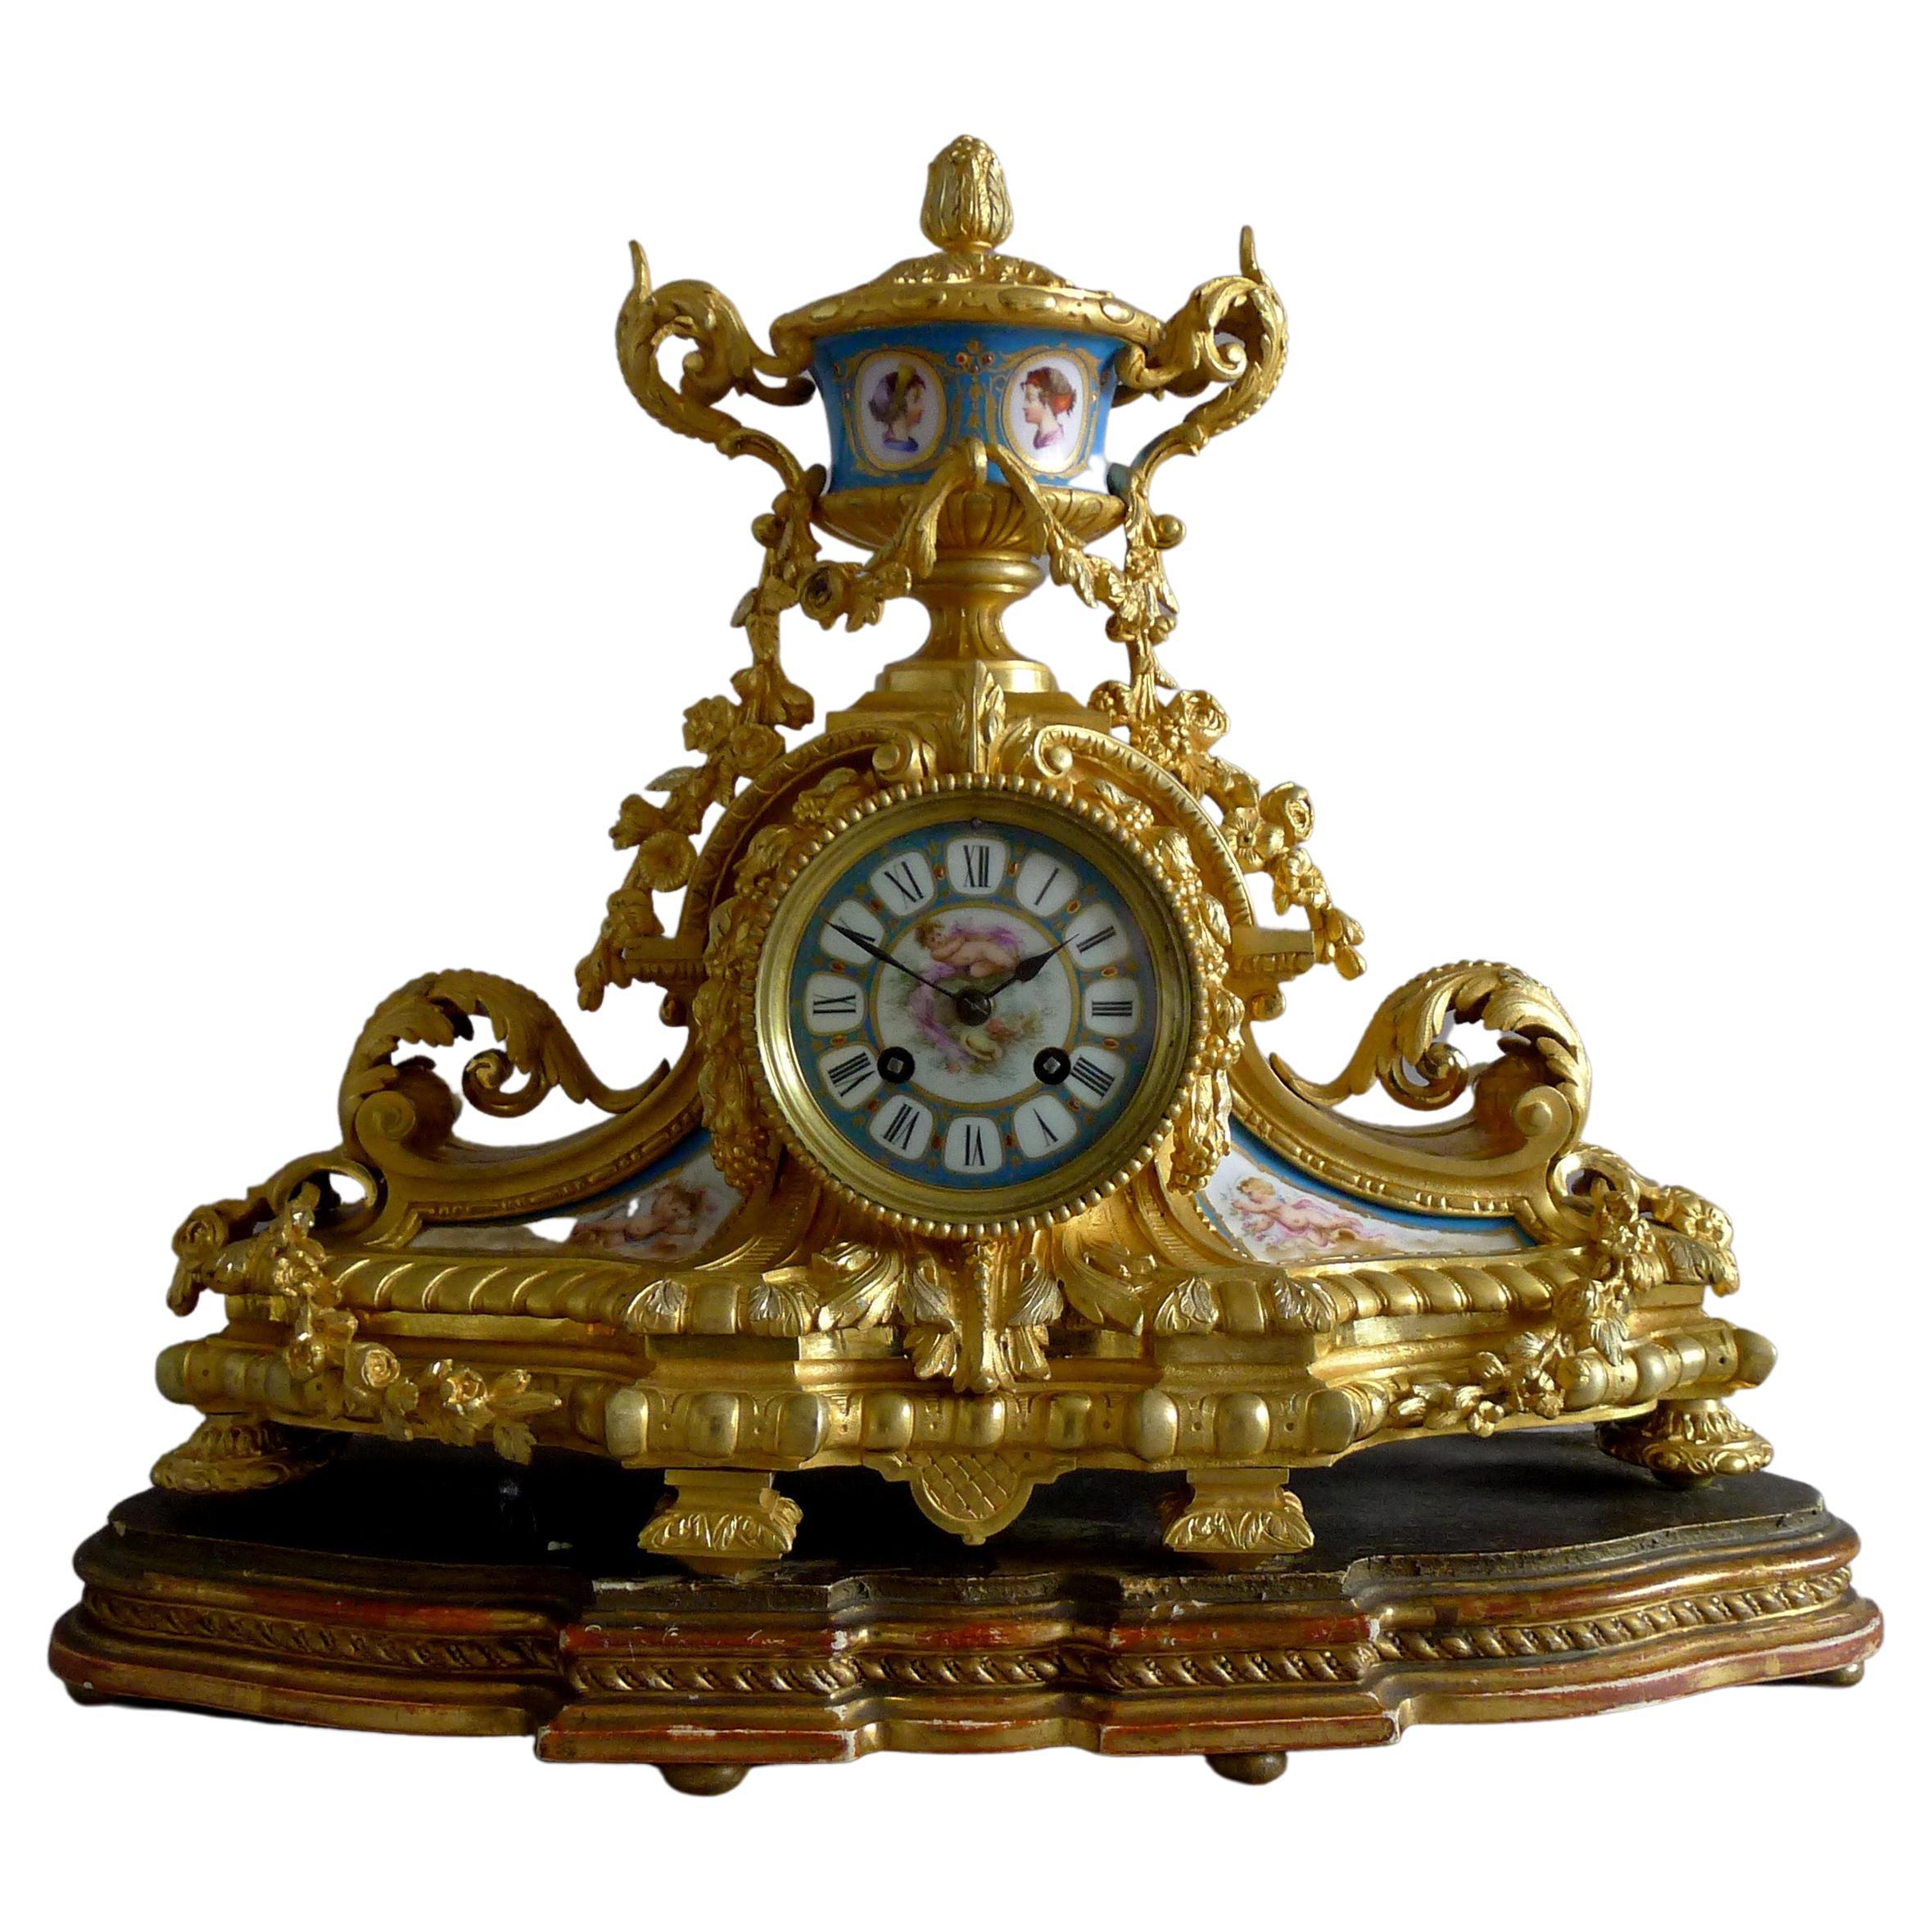 French porcelain and ormolu mantel clock with silver highlights mantel clock For Sale